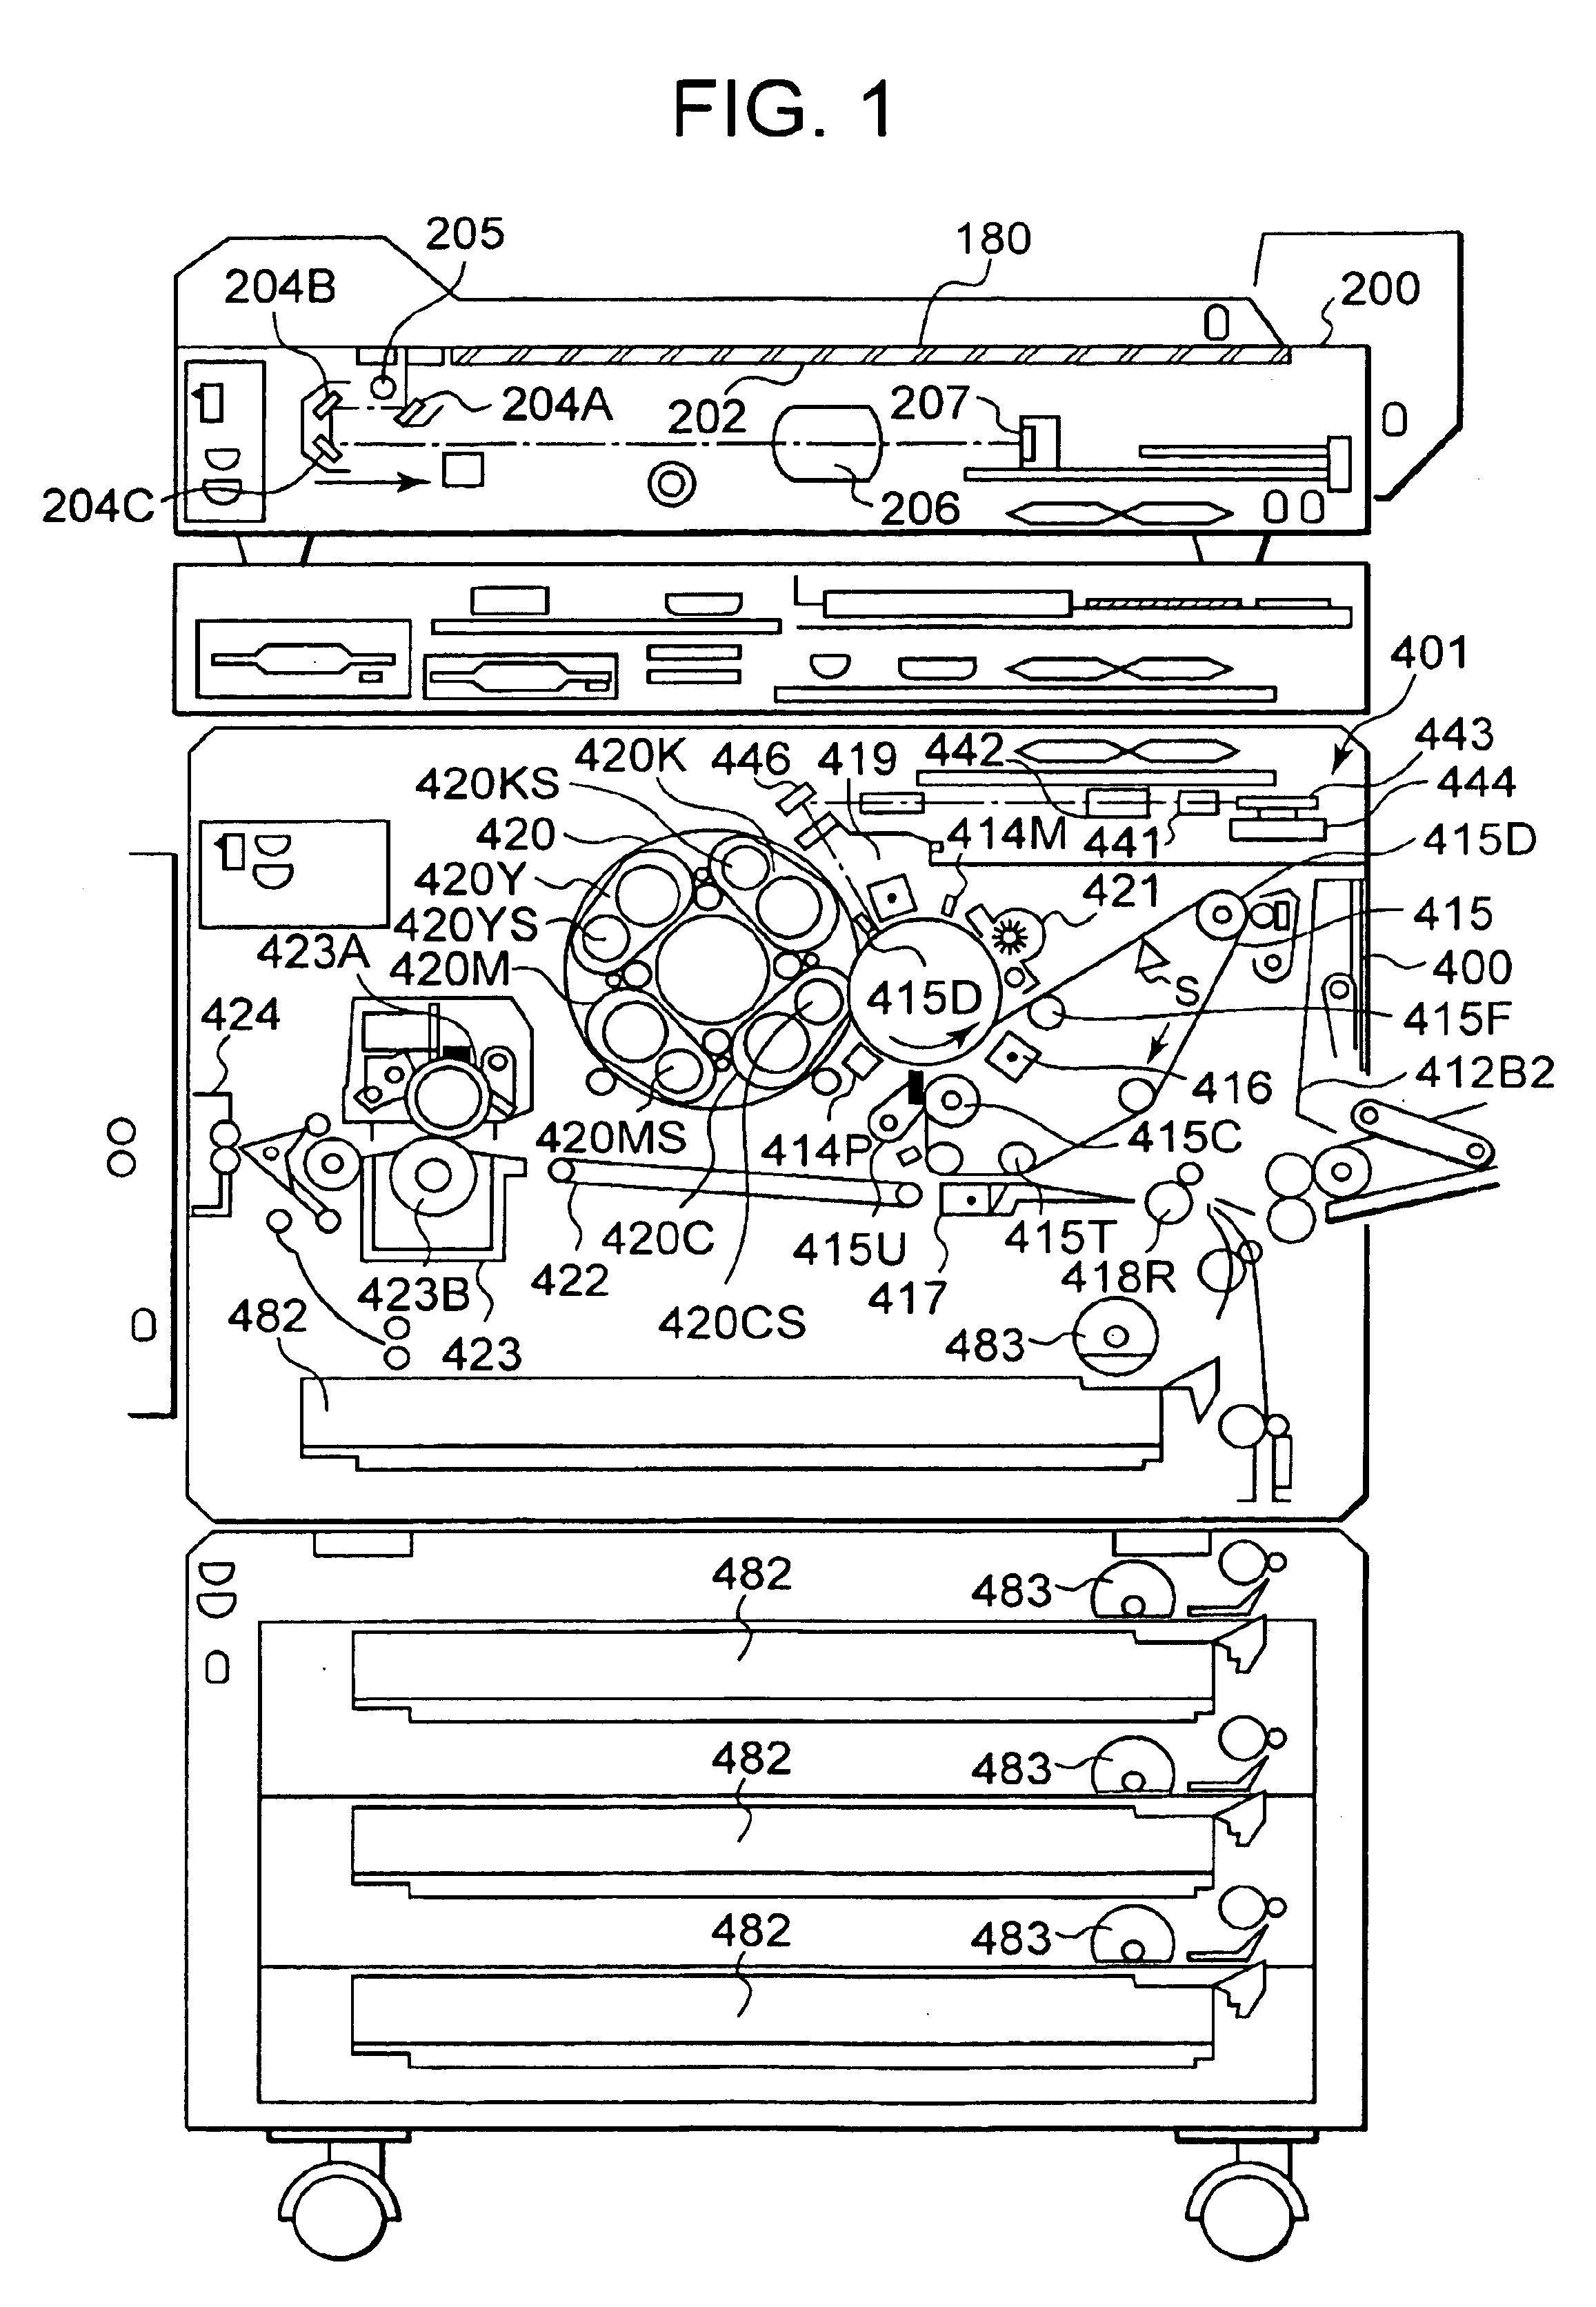 Method and system for processing character edge area data